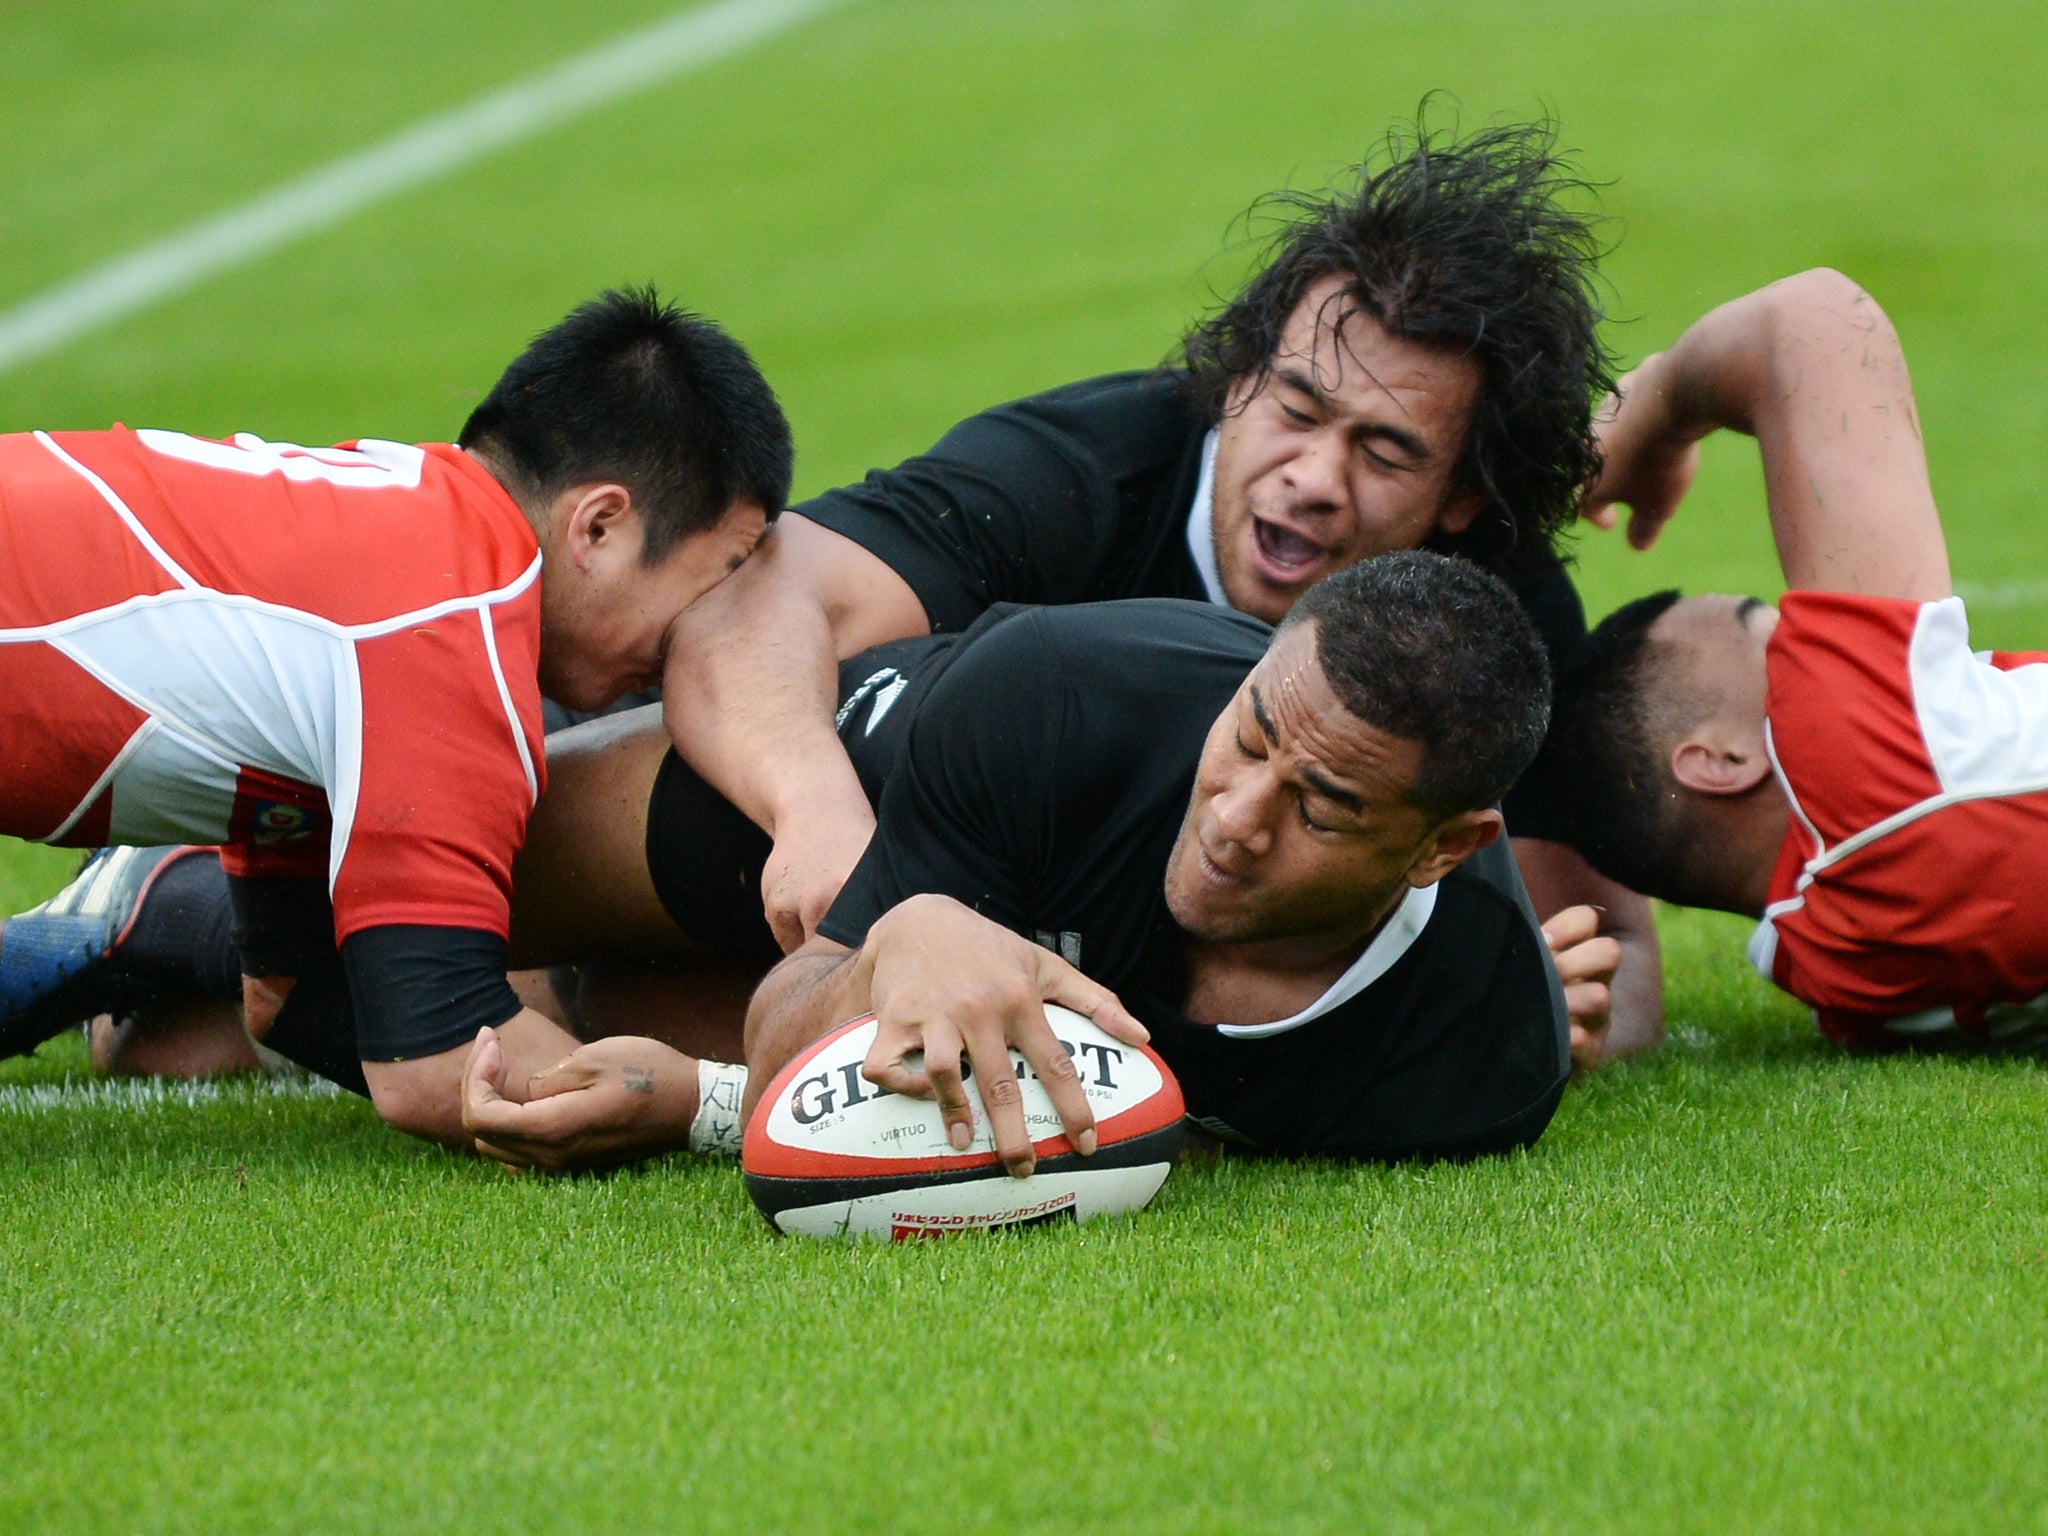 New Zealand's Frank Halai reaches out to score a try against Japan